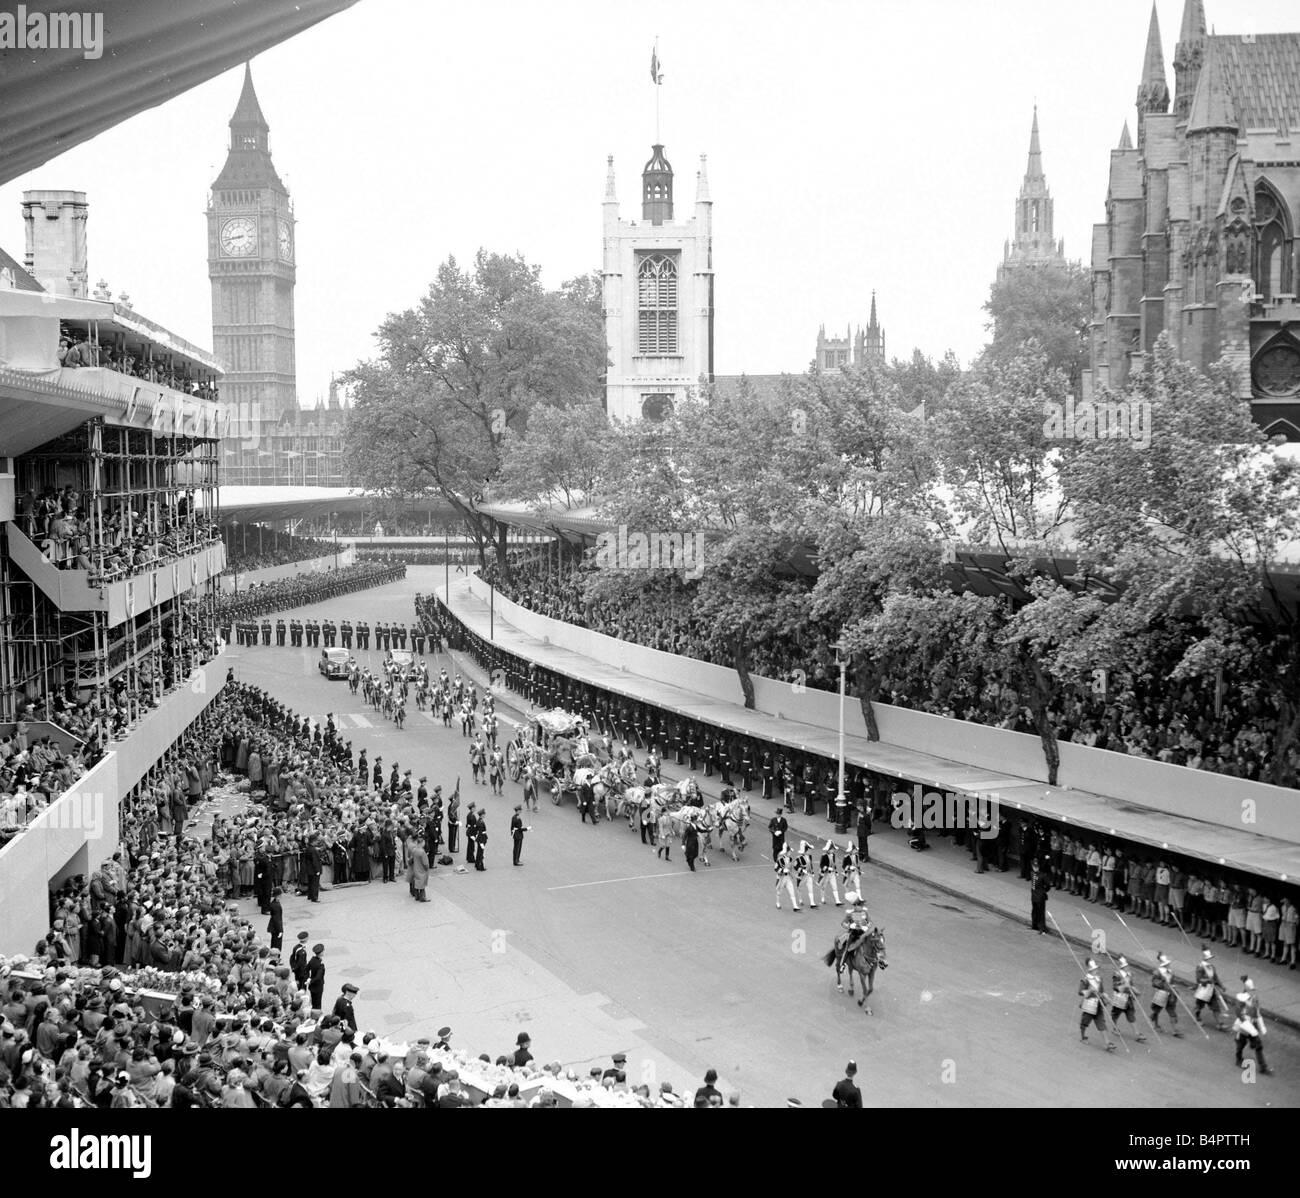 Queen Elizabeth II Coronation June 1953 The Queen s coronation procession nears Westminster Abbey in its journey from Buckingham Palace The Queen was carried through the streets of the capital in a majestic golden coach pulled by eight beautiful grey horses Heads of state foreign royalty and the leaders of every Commonwealth nation took part in the procession carried in their official coaches to the Abbey Stock Photo